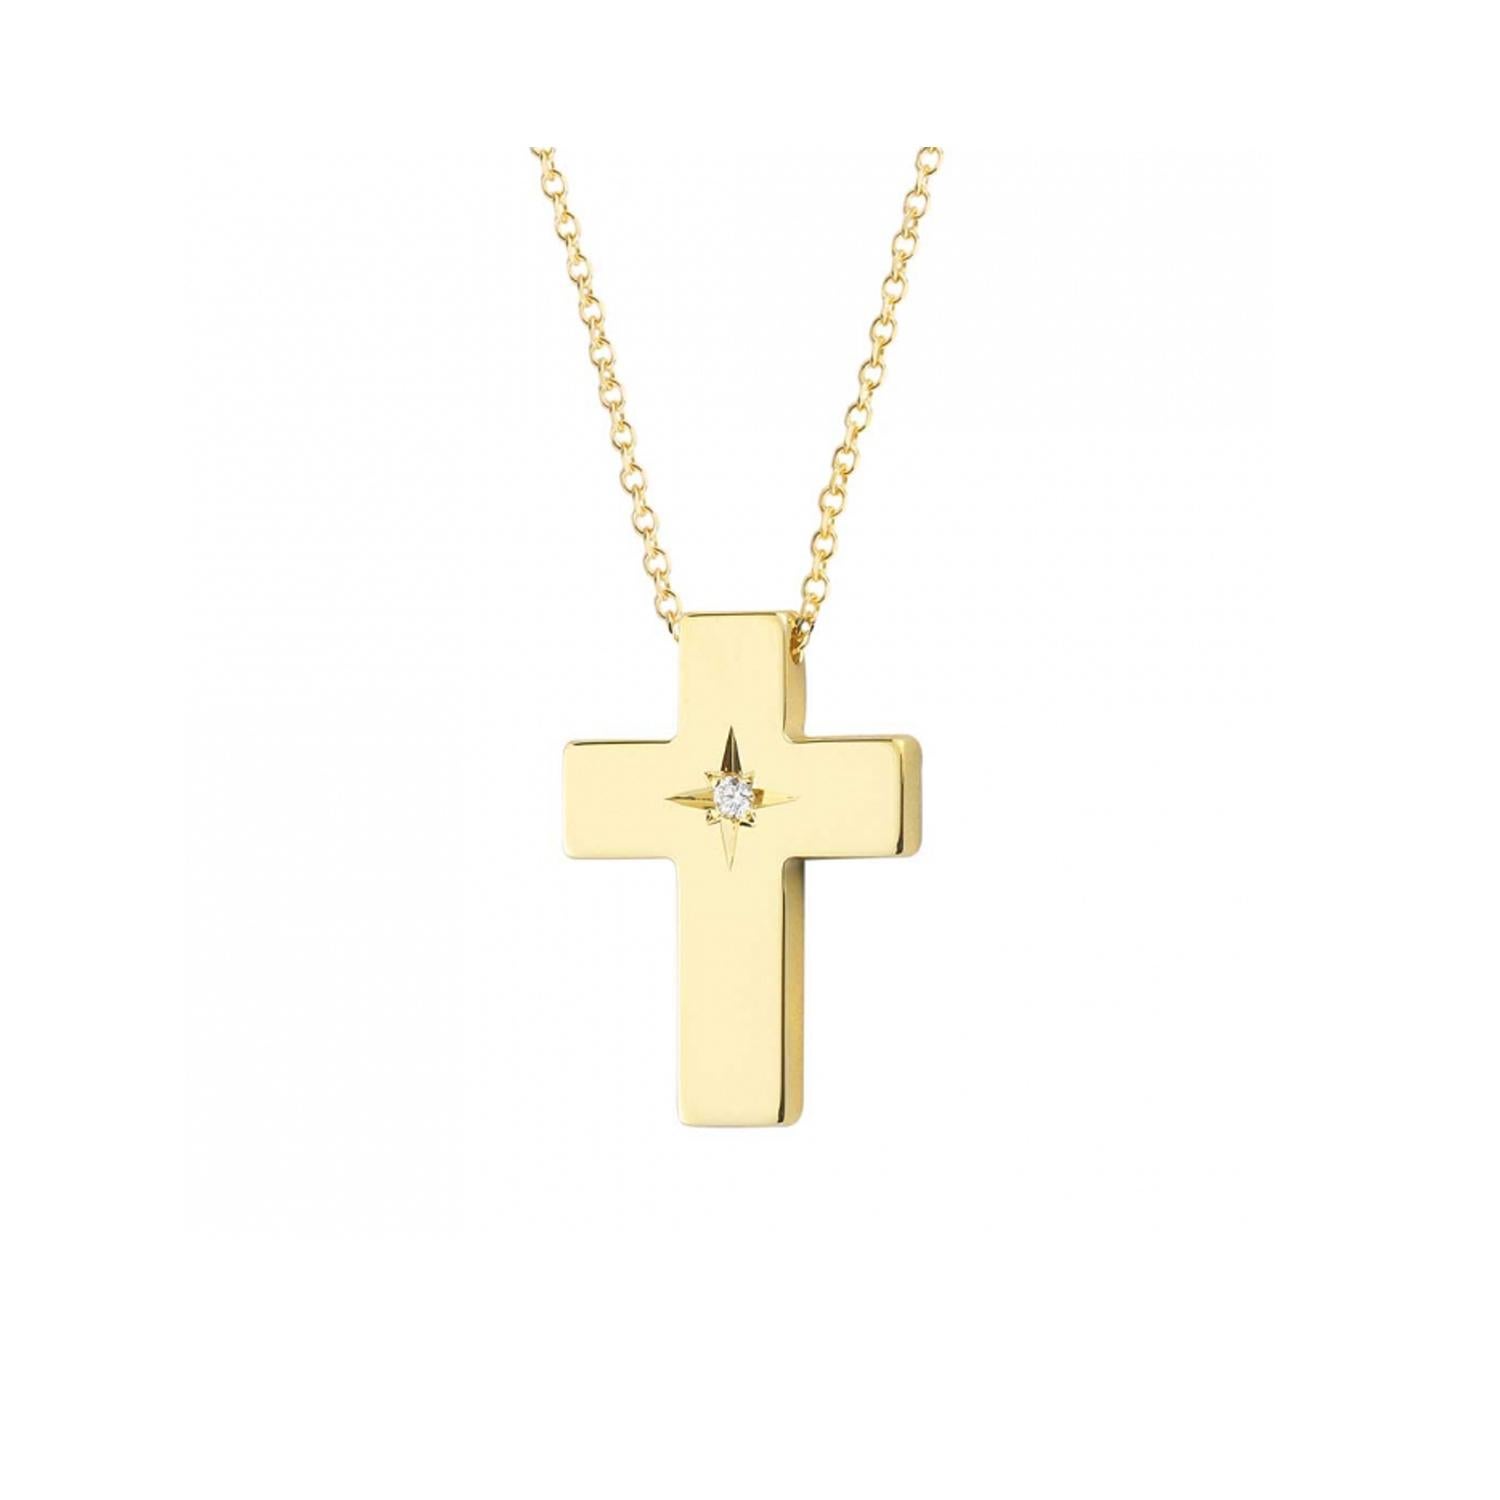 Cross in 14Kt Yellow Gold with Diamond Vintage Star Setting and Chain.
The diamond is a brillant cut in the  centre 0.020ct. A modern cross with a vintage  sense, as  the diamond has the vintage star setting, with a   length of 42 cm that  it's easy